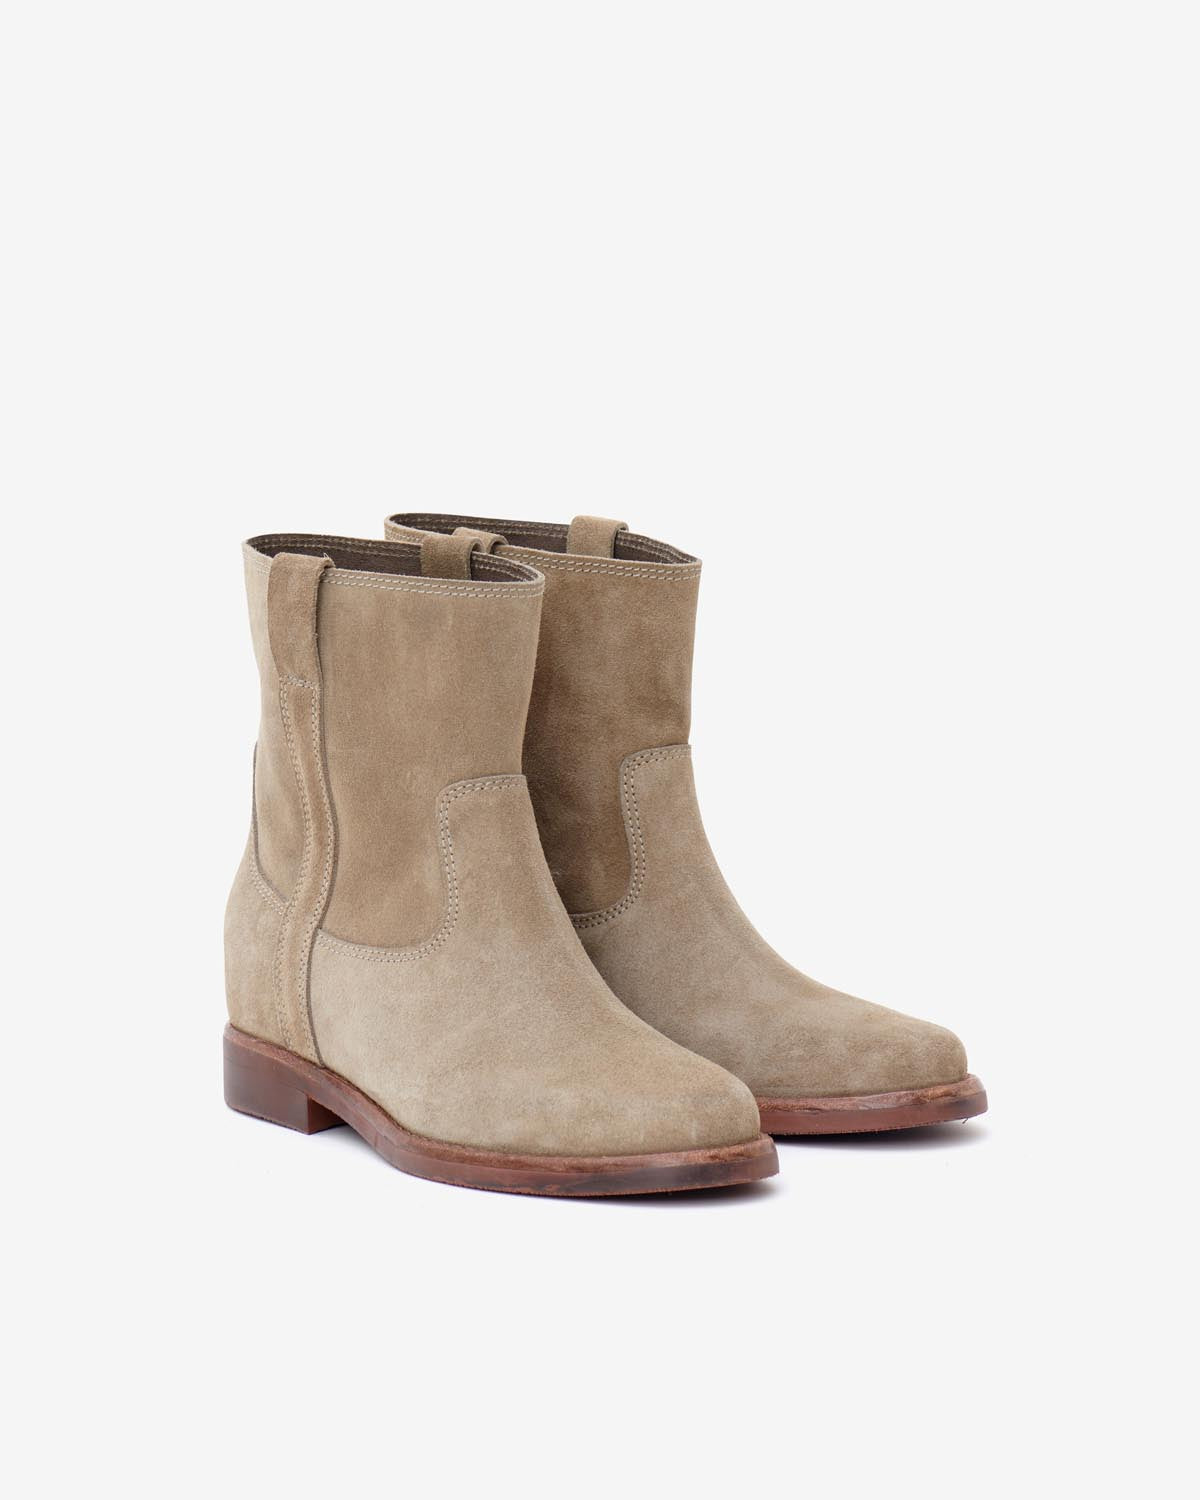 Boots susee Woman Taupe 5